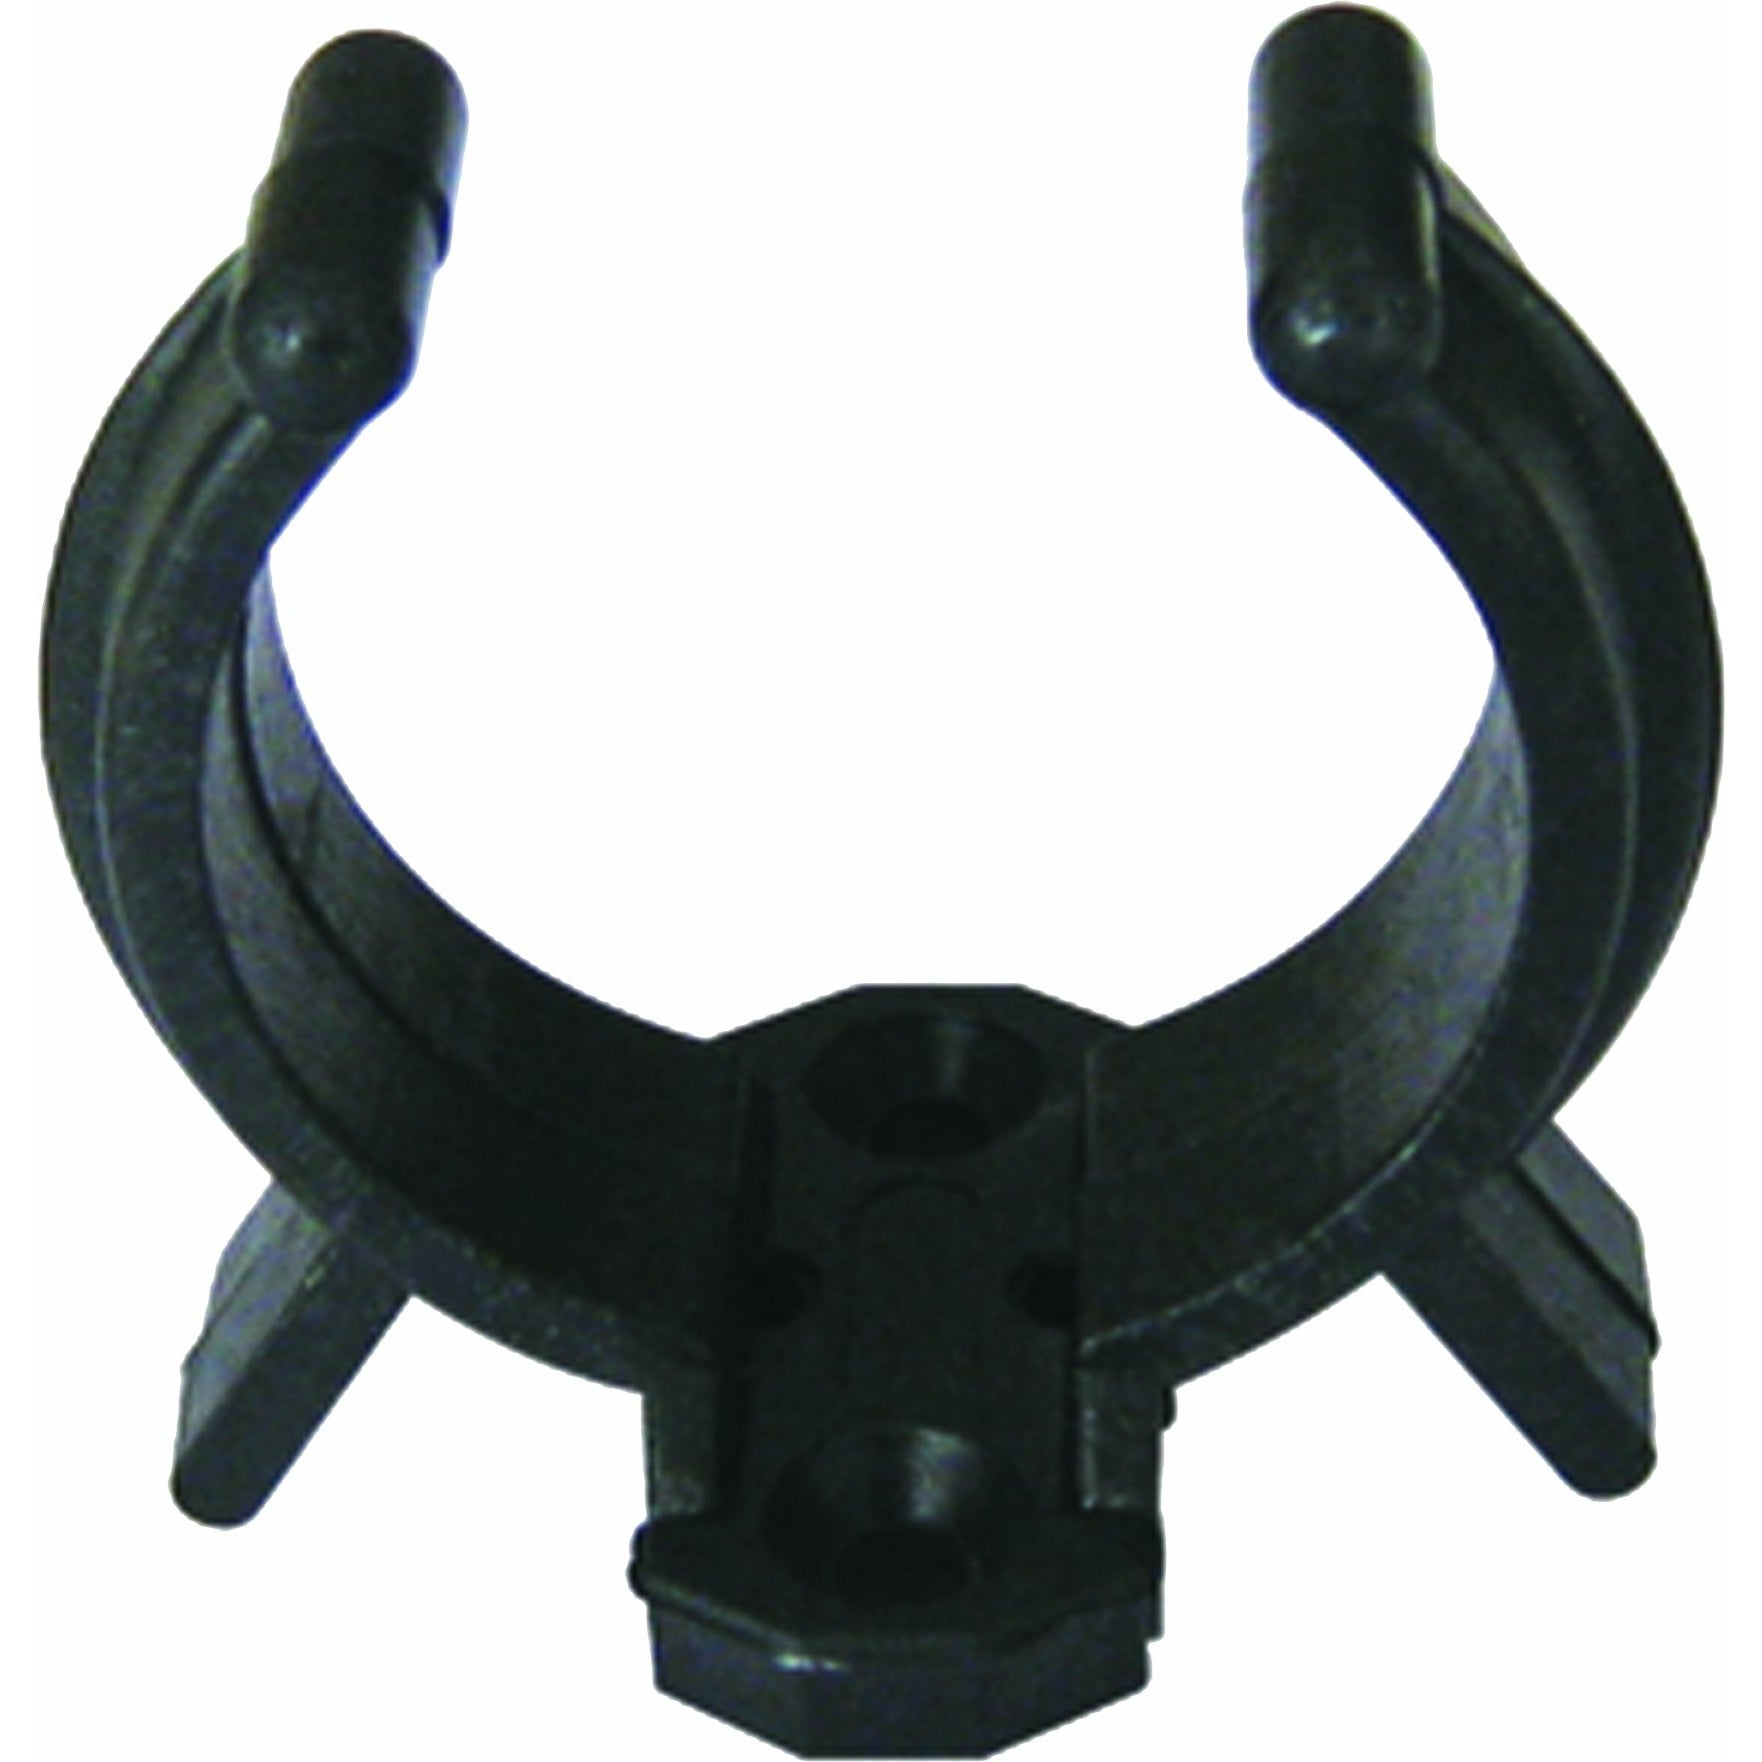 Talamex Clip Holders For Oars Black 27-35MM (2) 25227062